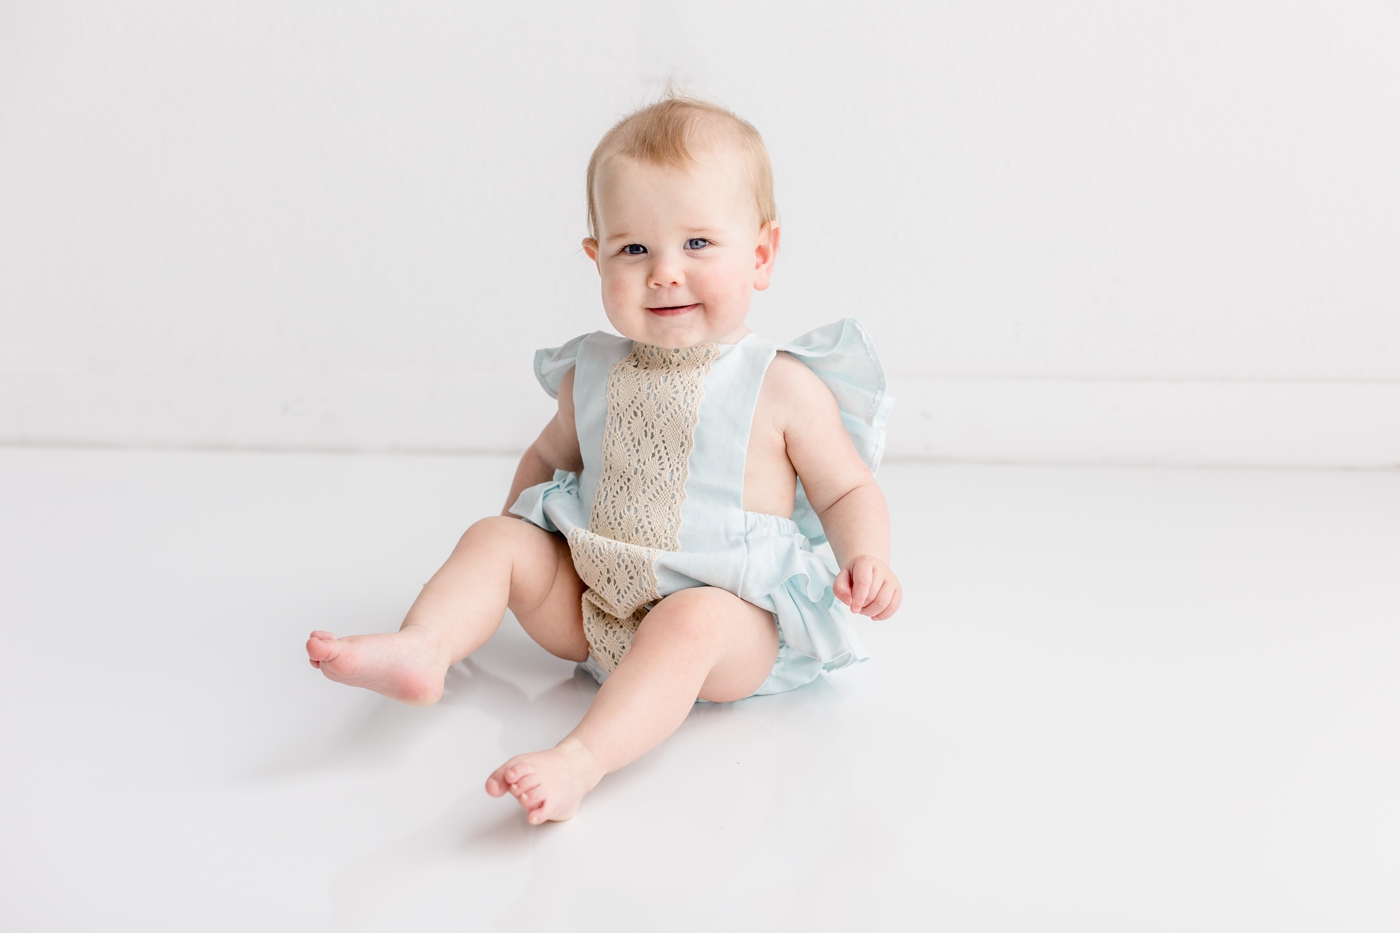 Smiling baby girl in blue bubble romper during first birthday milestone session. Photo by Sana Ahmed Photography.